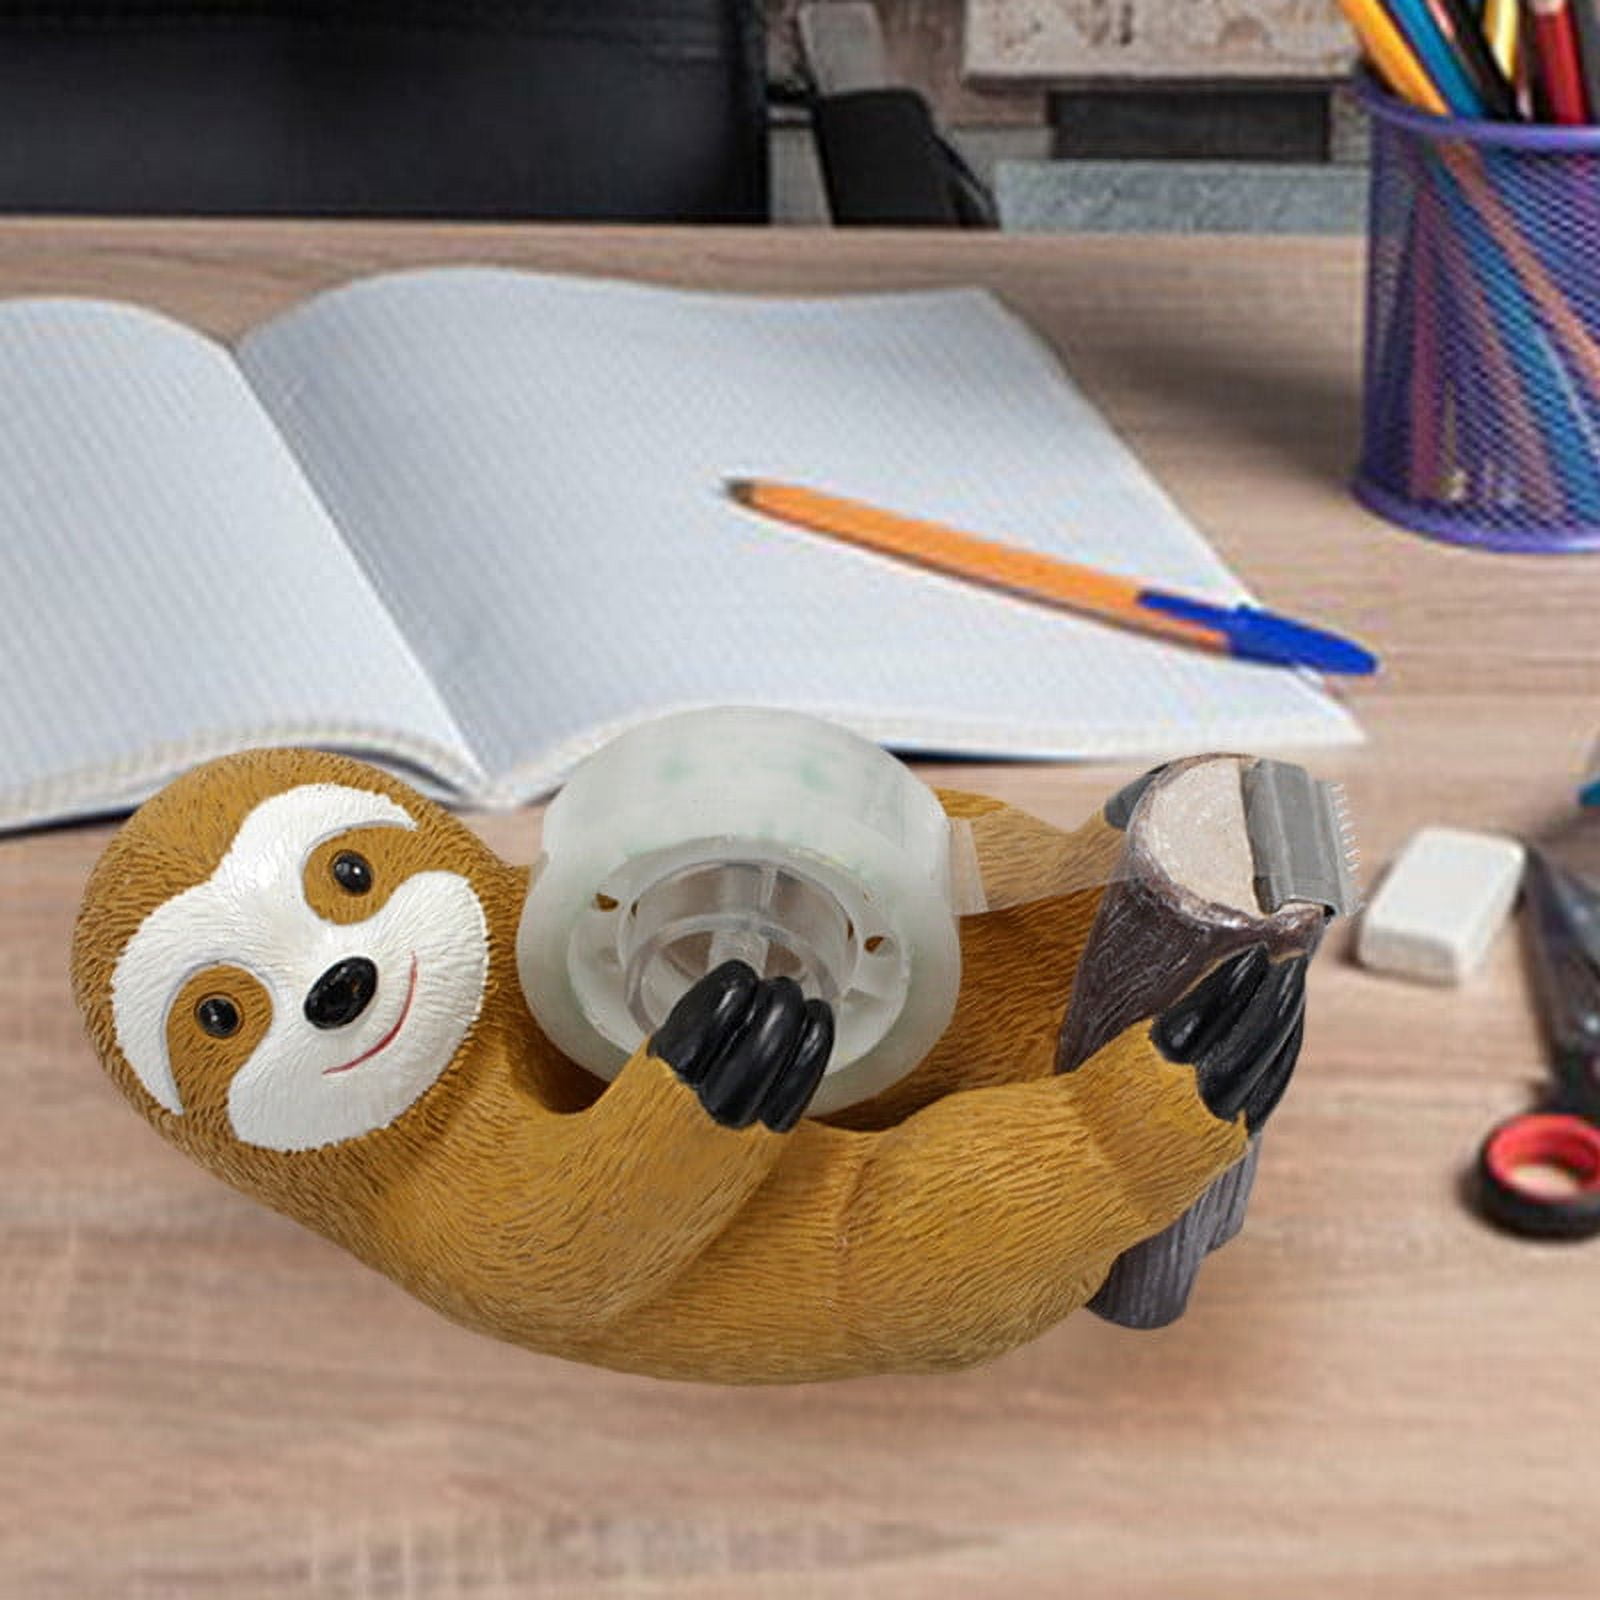 Tomorrow Delivery Sloth Tape Cutter Tape Dispenser With Tape For Kids  School Office Stationery Supplies